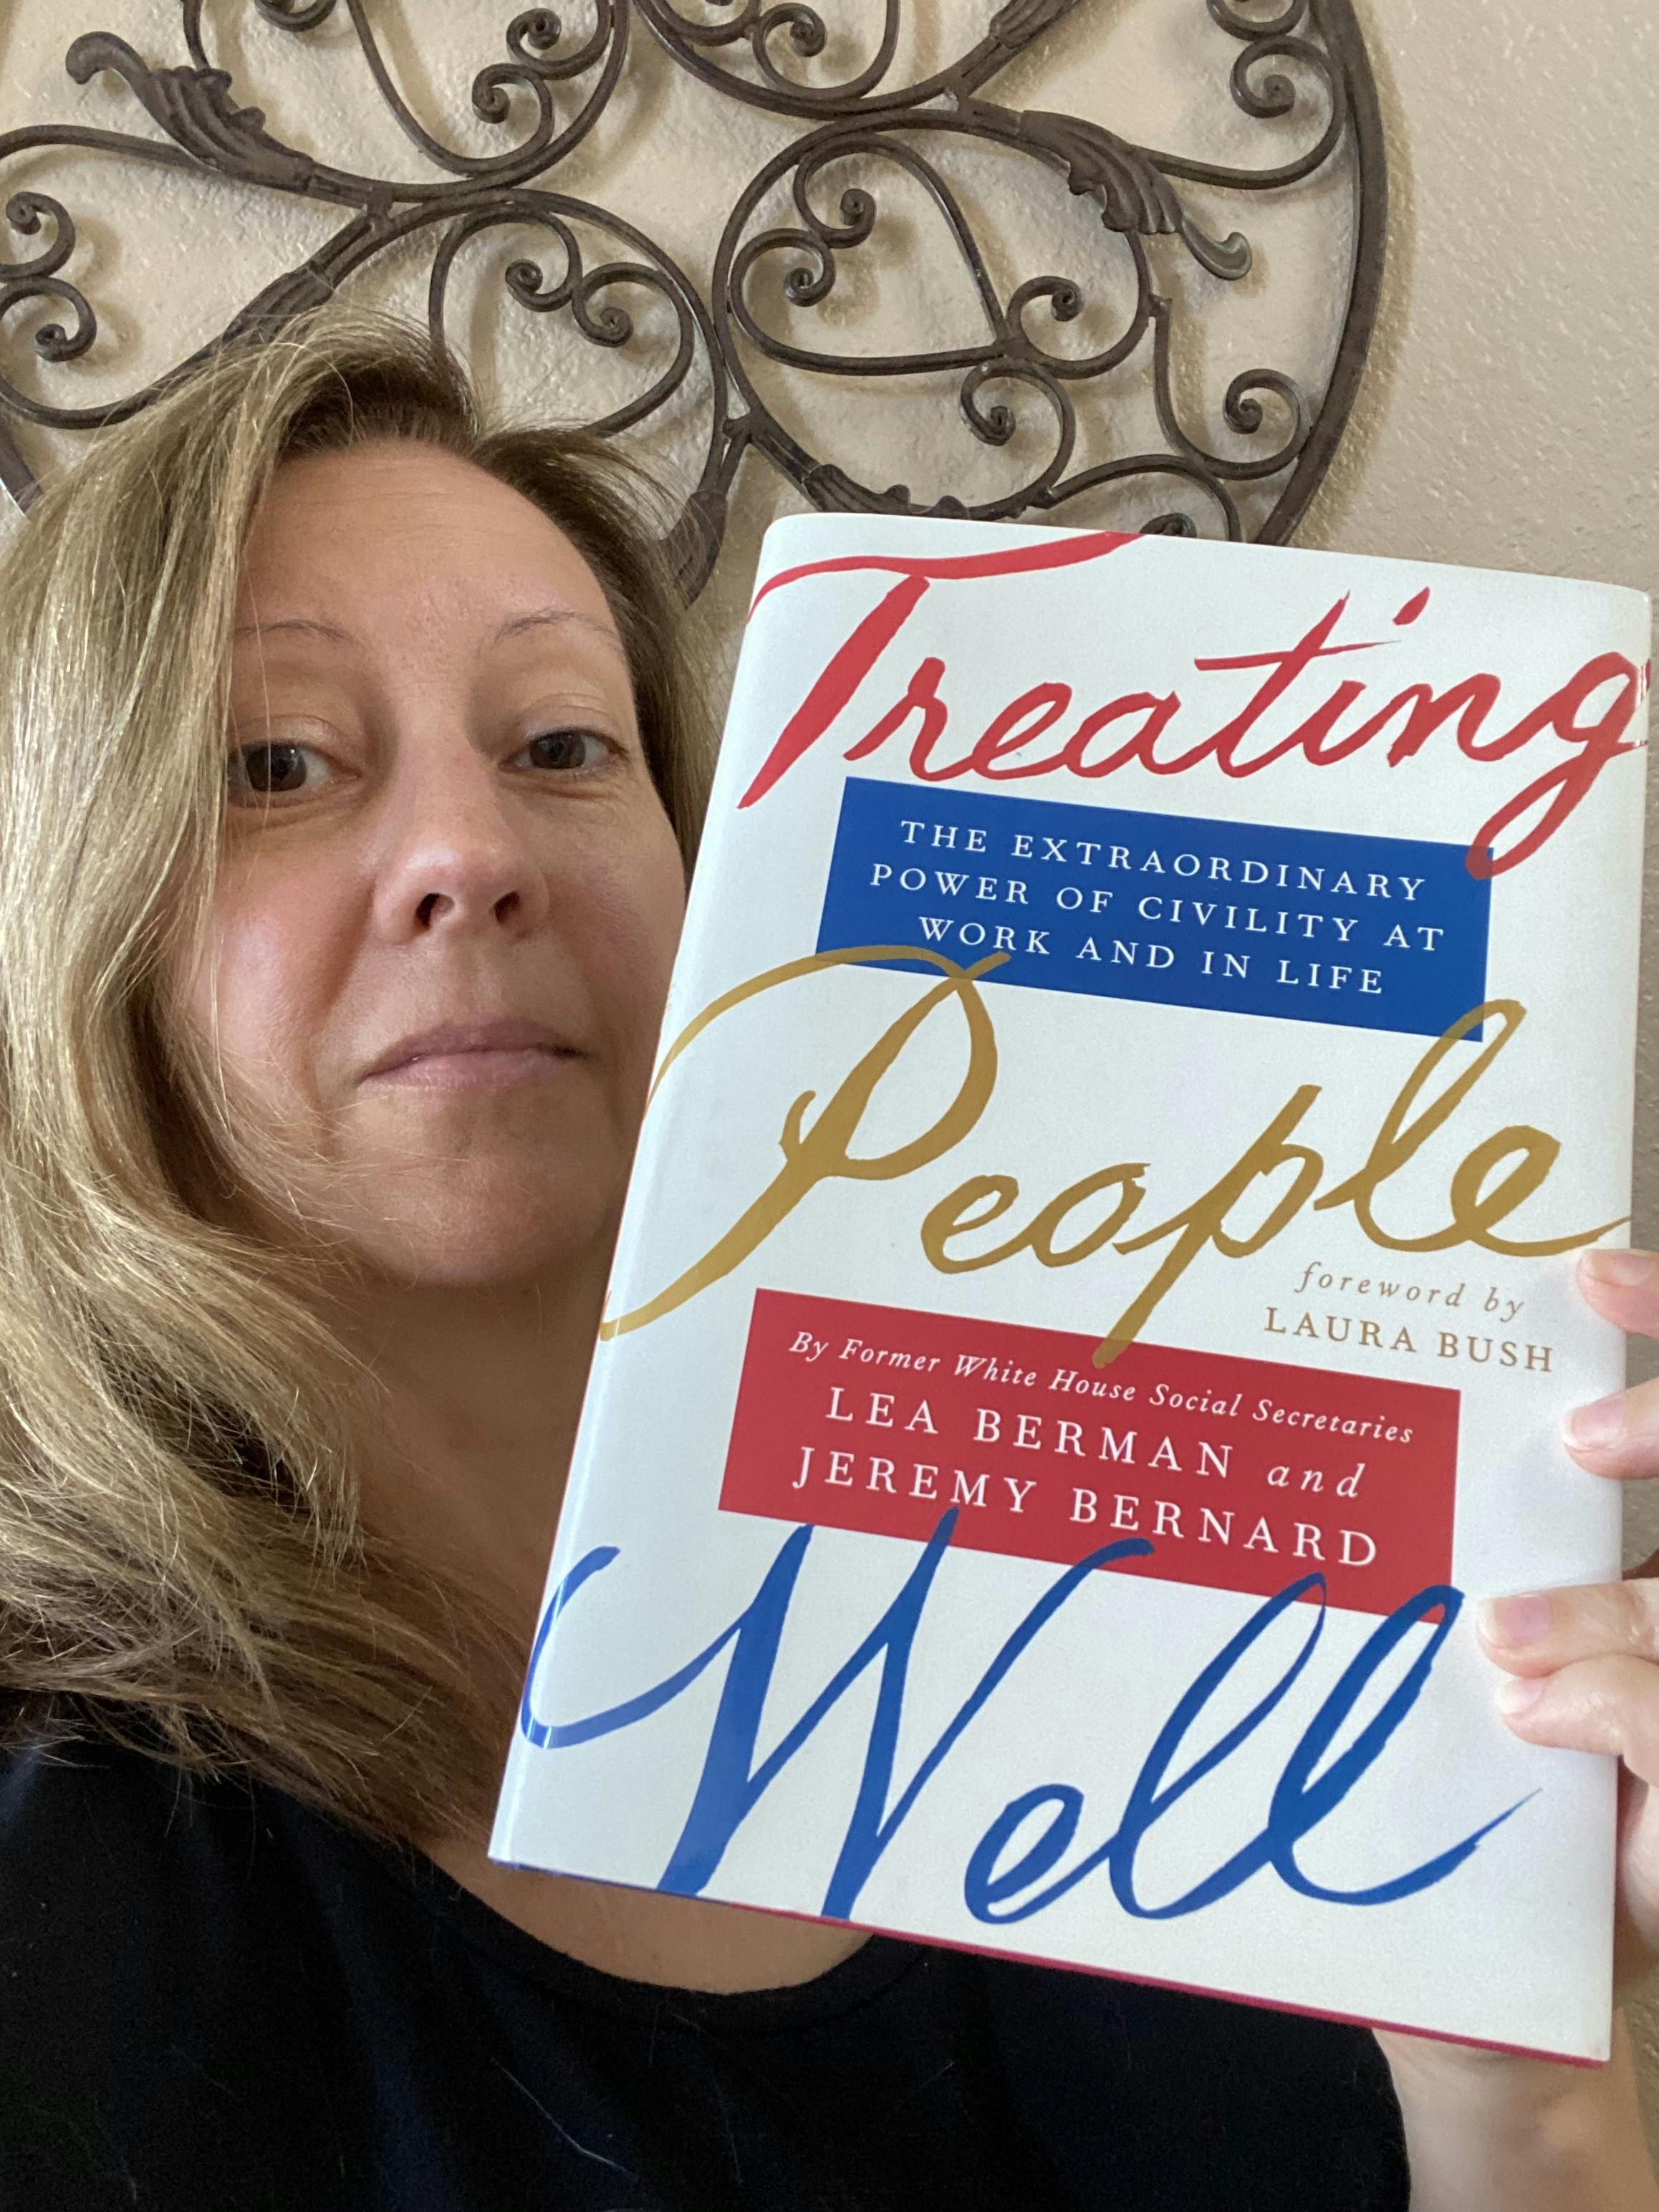 Stephanie holding the book "Treating People Well: The Extraordinary Power of Civility at Work and in Life" by Lea Berman & Jeremy Bernard.